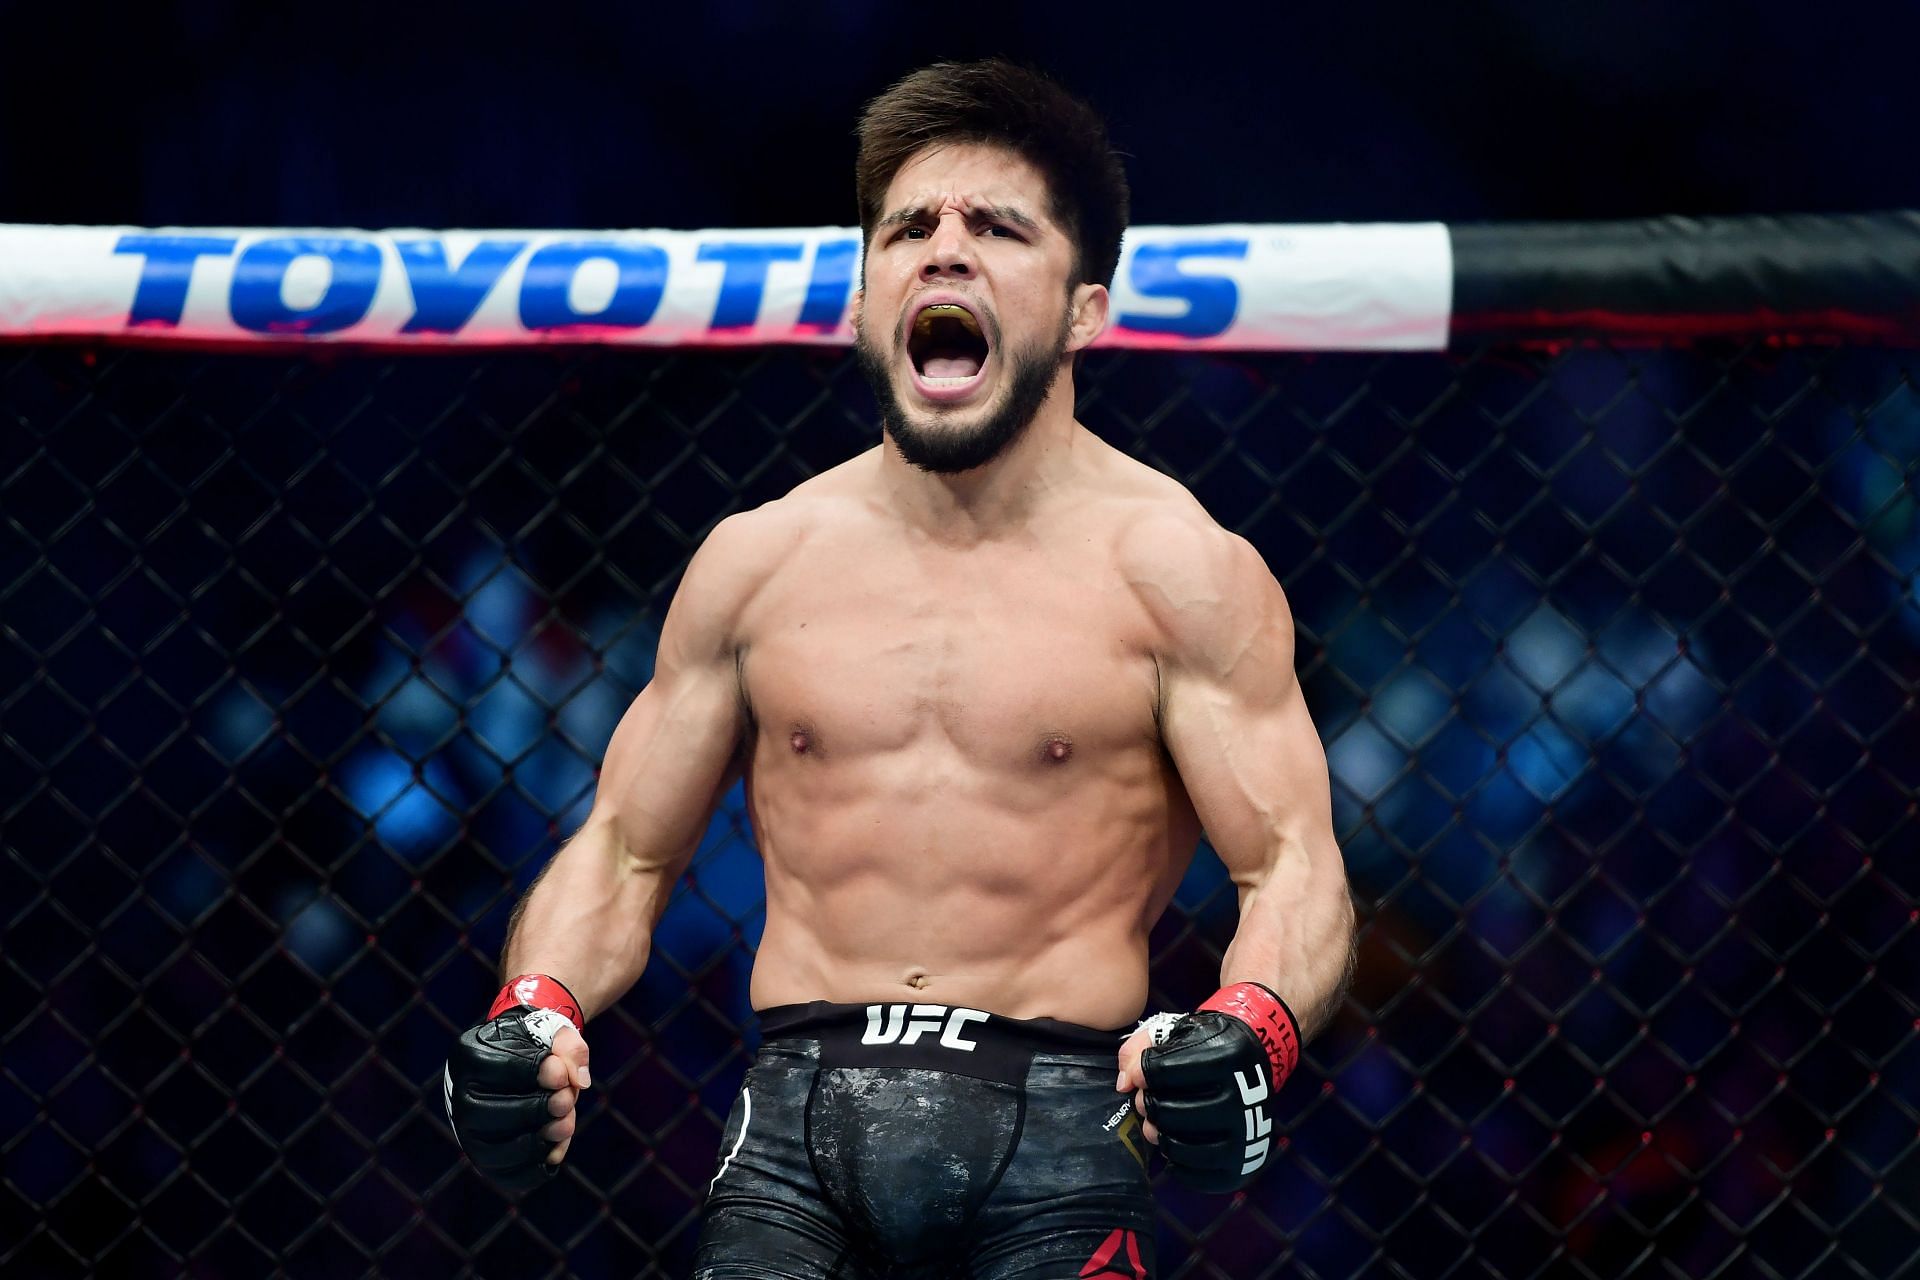 Henry Cejudo walked to the beat of his own drum in the UFC - right down to his sudden retirement